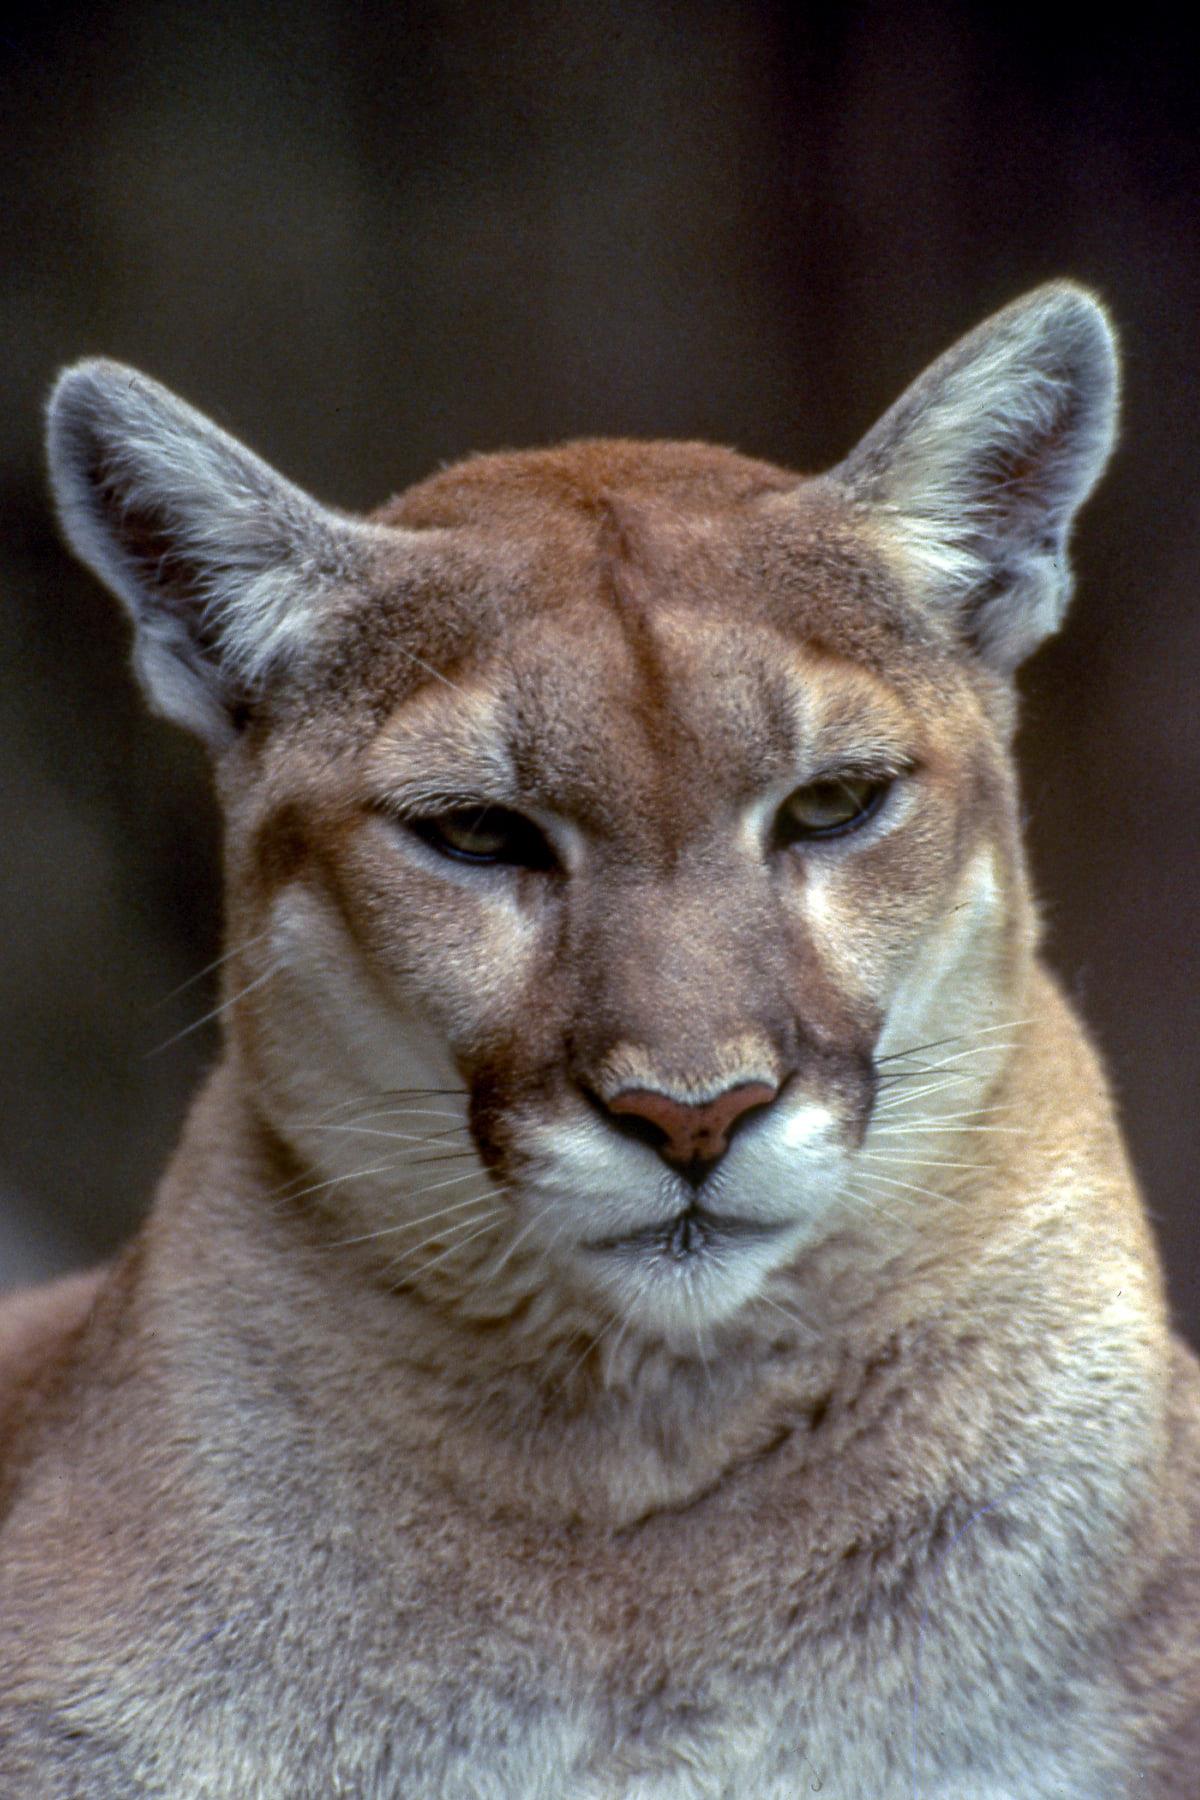 Mountain Lion Spotted in Princeton, Confirmed by Texas Parks and Wildlife Department